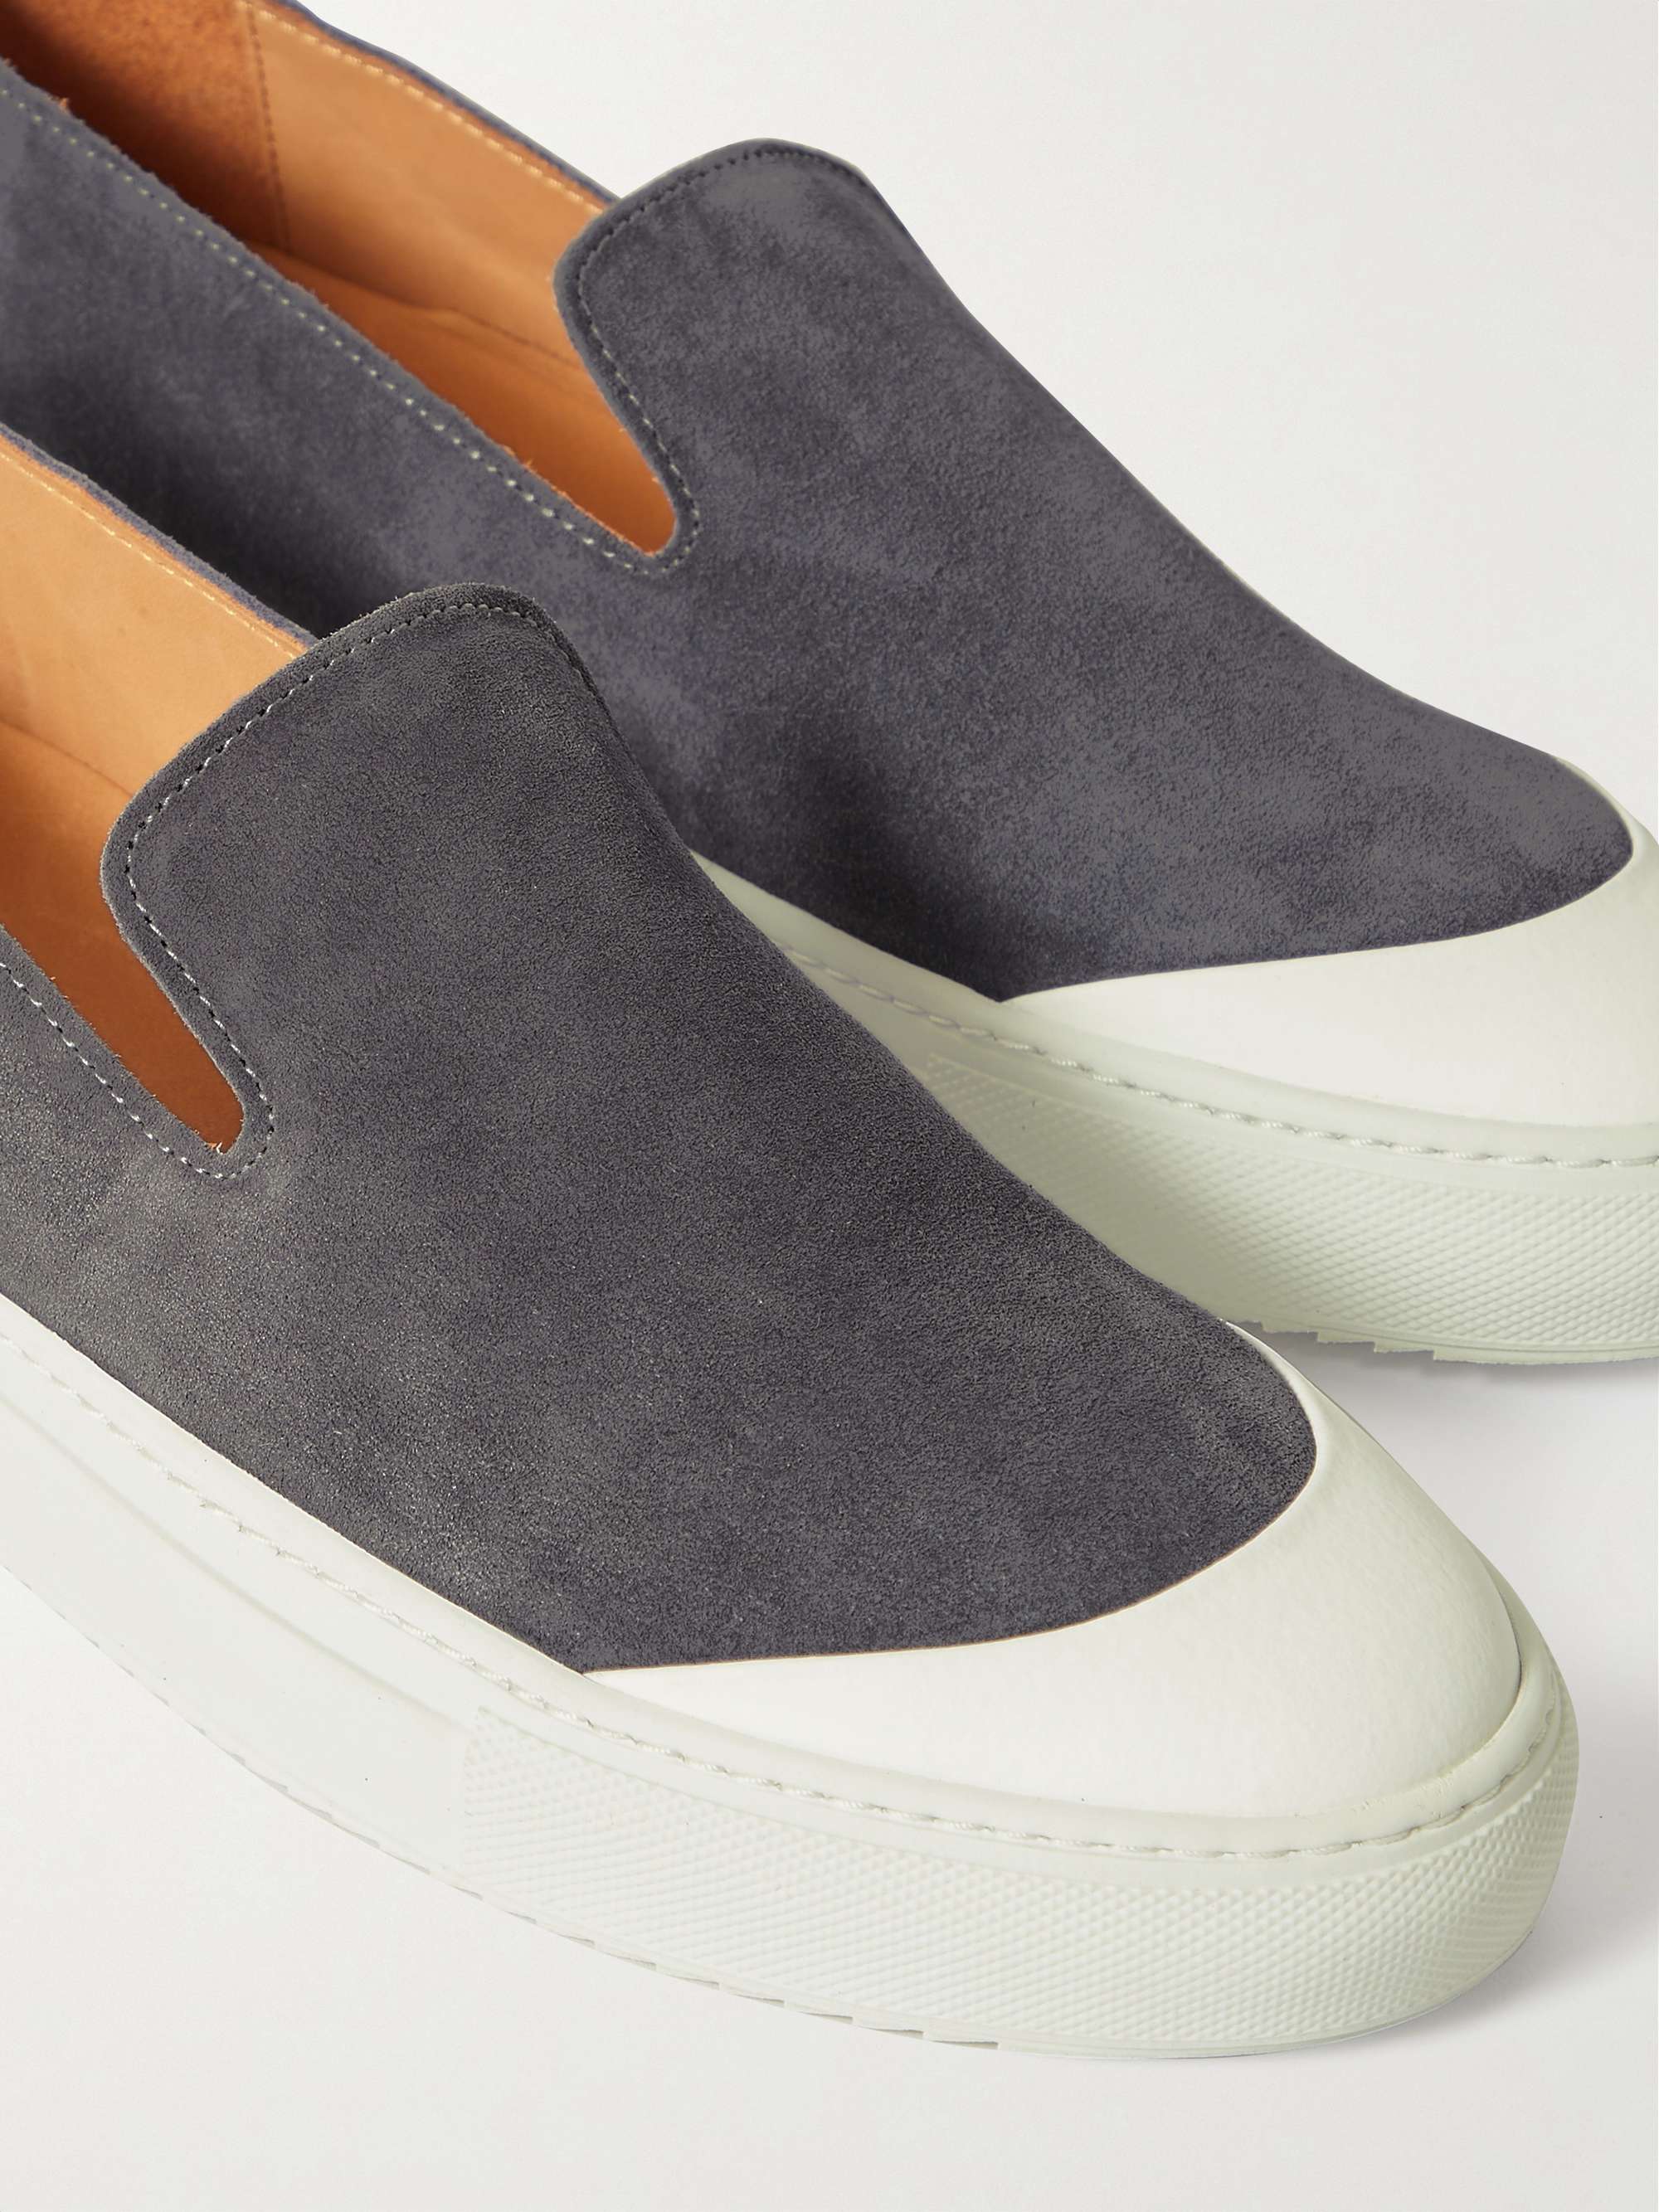 MR P. Larry Regenerated Suede by evolo® Slip-On Sneakers